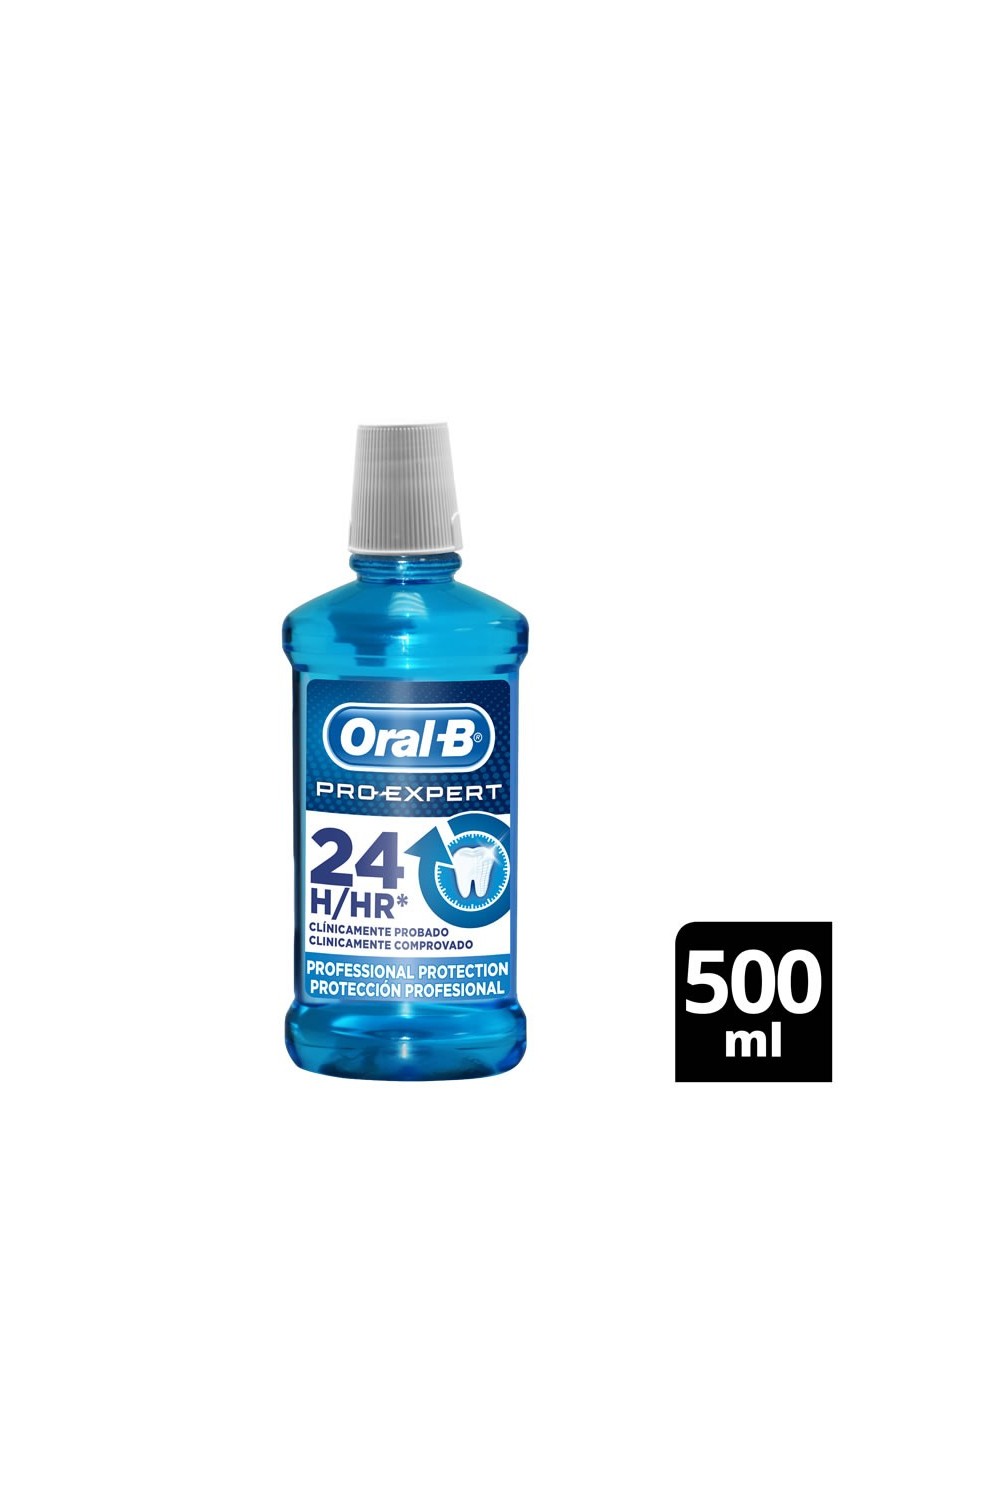 Oral-B Pro-Expert Professional Protection Fresh Mint Mouthwash 500ml